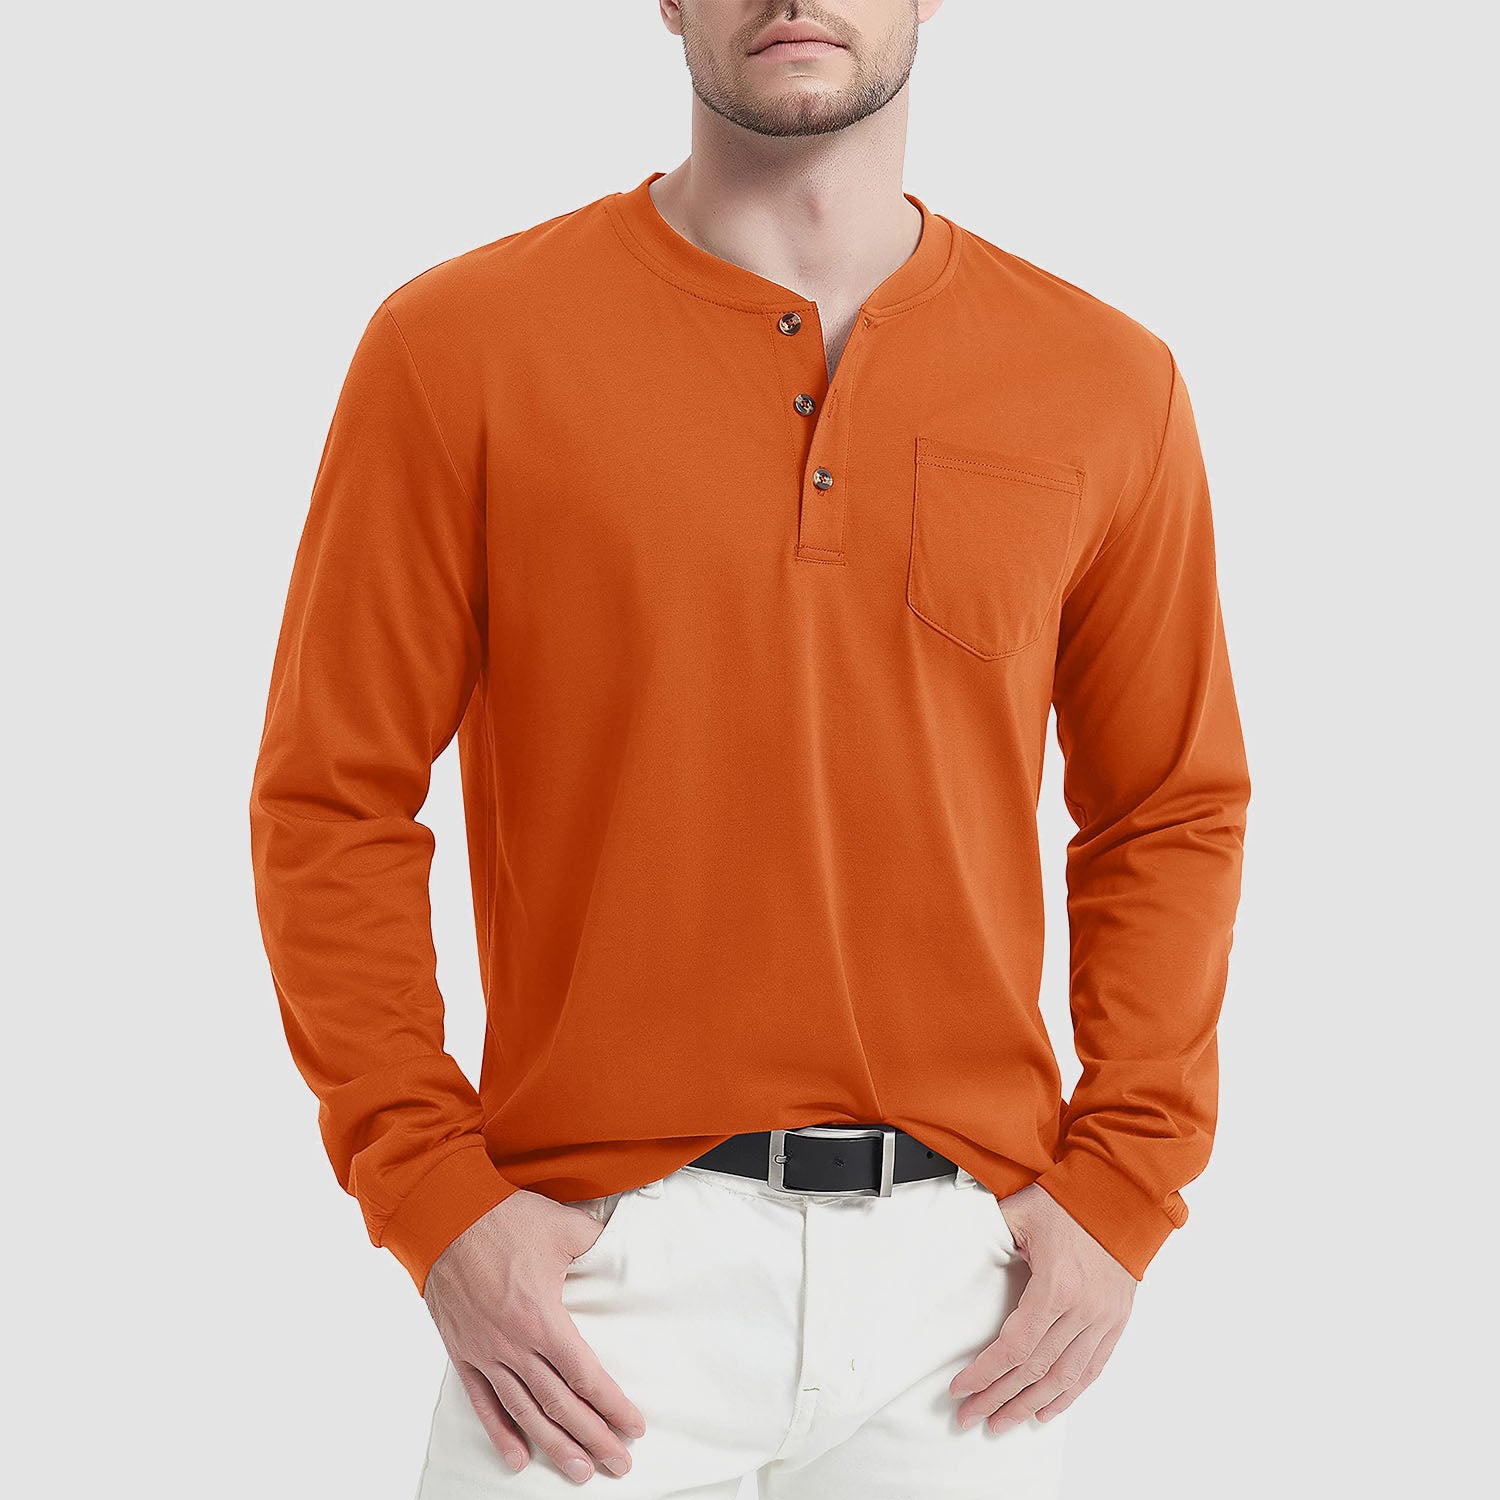 Men's Henley Shirt Cotton Long Sleeve Casual Shirts with Pocket Button Placket